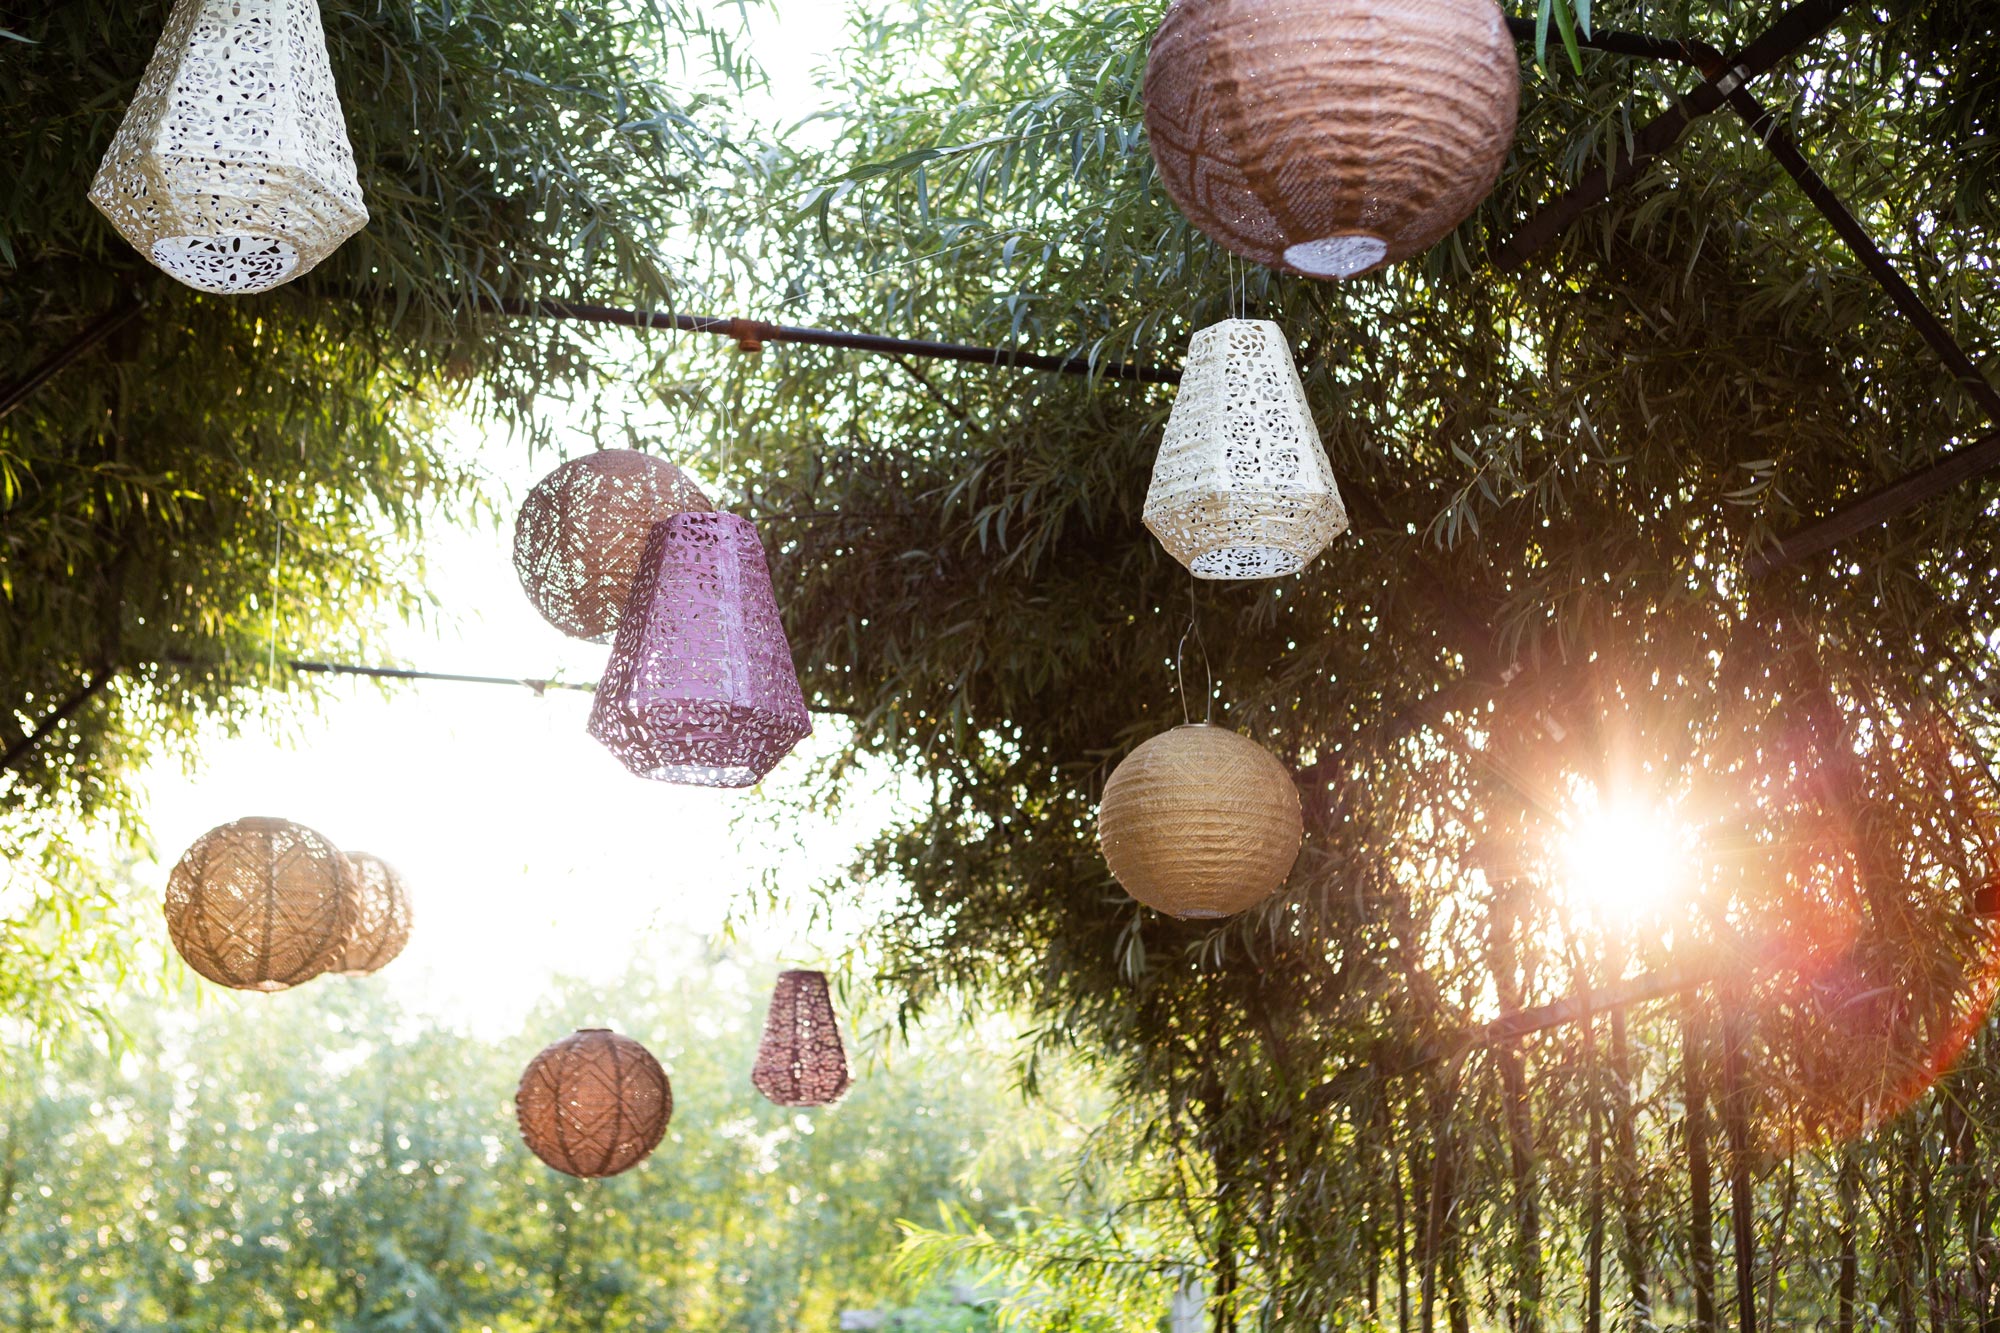 Overhead, lacy, solar-powered Terrain lanterns hang, purposely pell-mell, swaying in the breeze from the trellised archway in the chef’s garden.